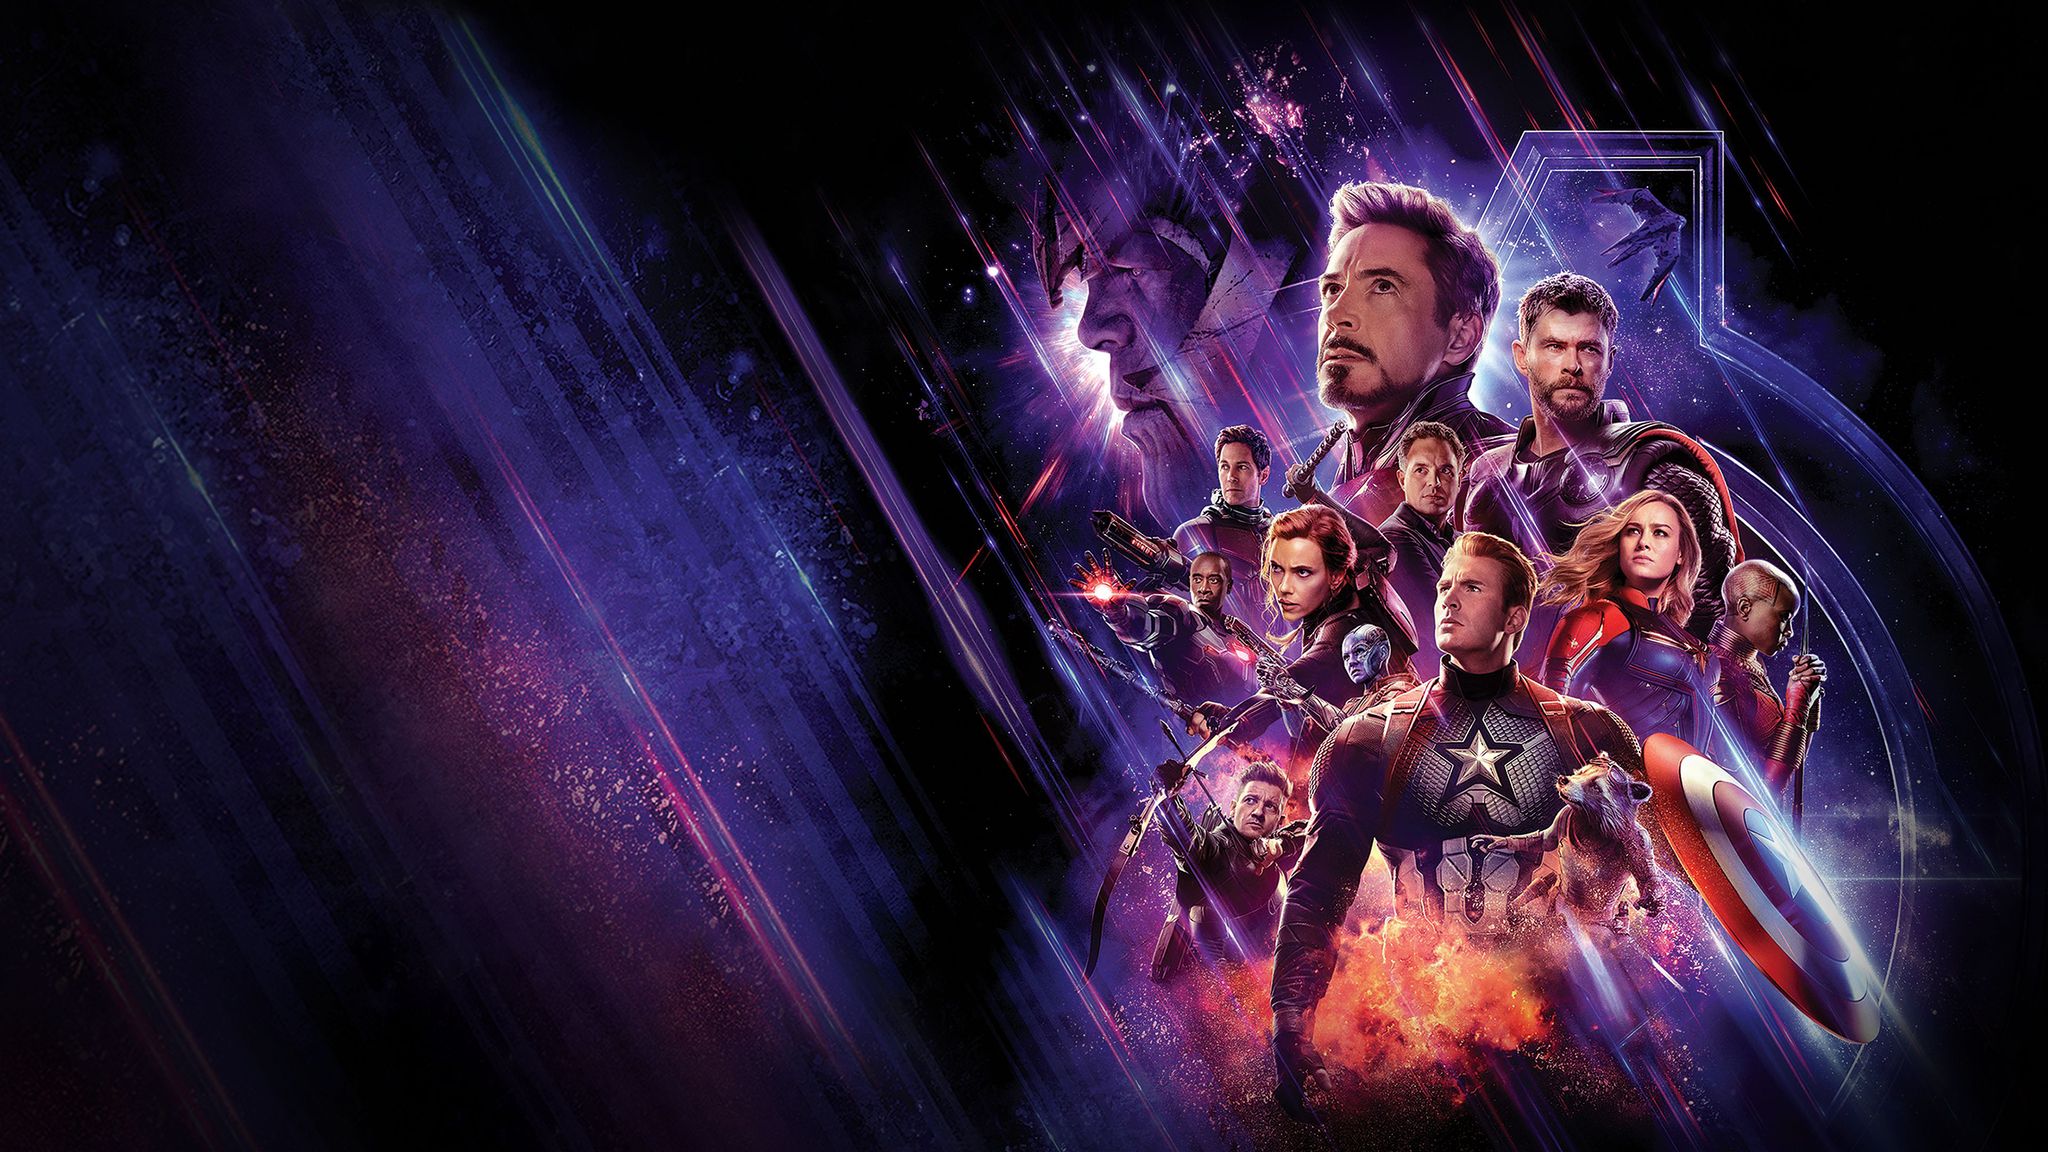 2048x1152 Avengers End Game 4k Banner 2048x1152 Resolution Hd 4k Wallpaper Image Background Photo And Picture